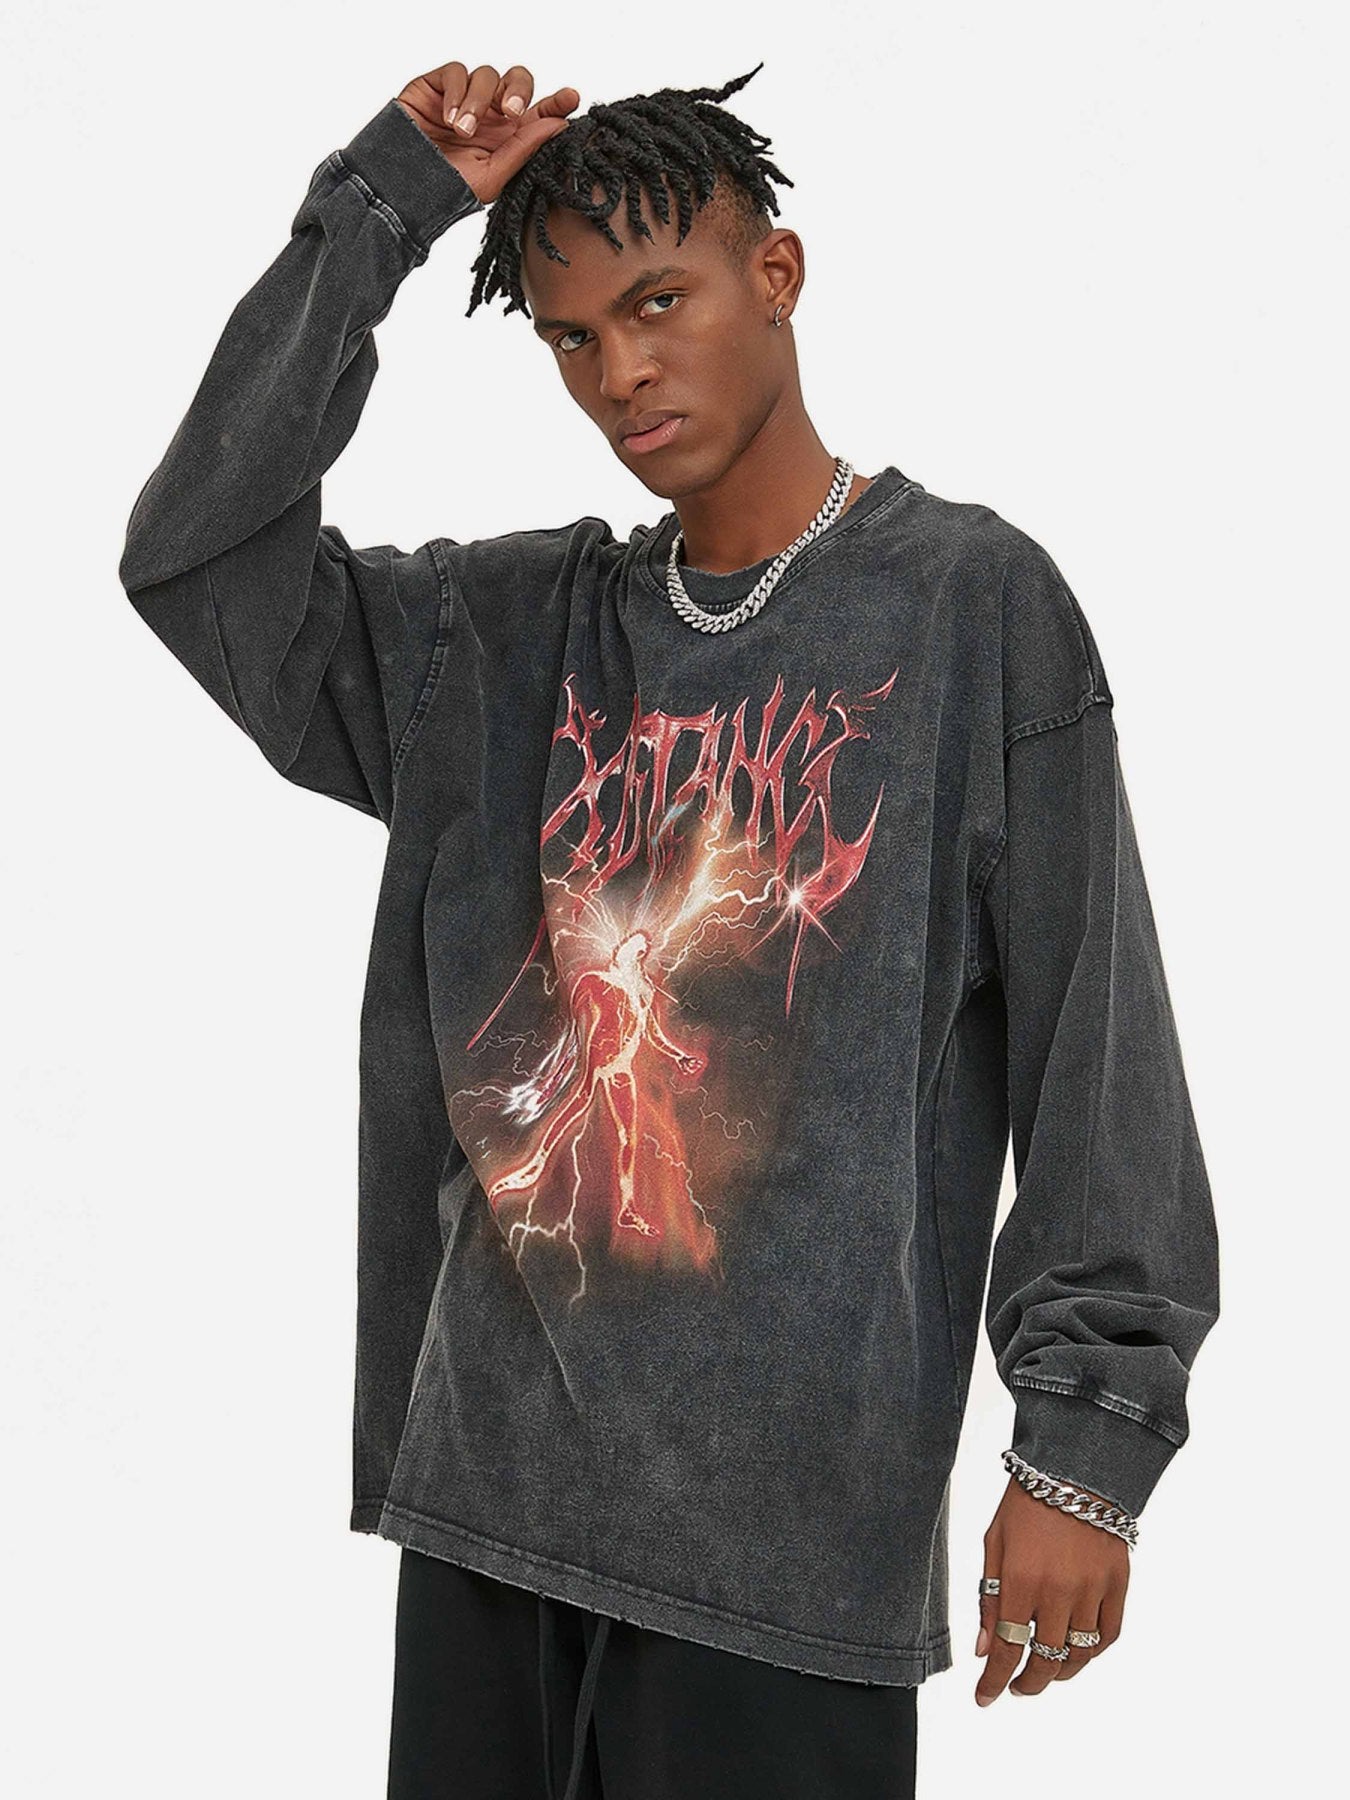 The Supermade Flame Patterned Aged Washed Crew Neck Sweatshirt